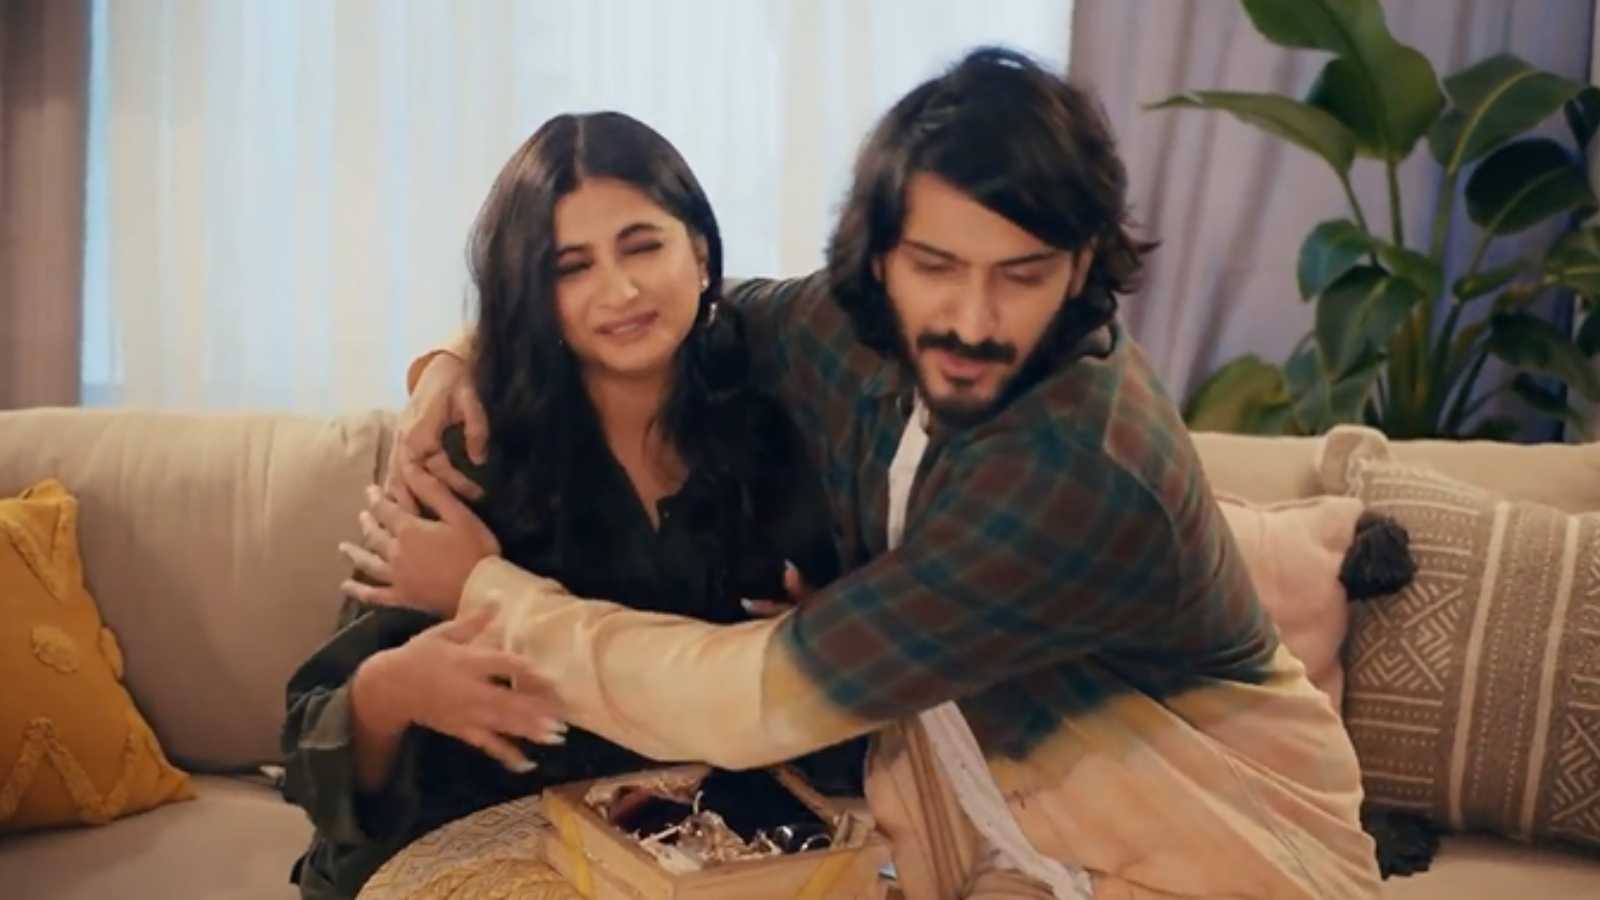 Rhea Kapoor 'disgusted' by idea of hitting on brother Harsh Varrdhan Kapoor's friends, his response will make you agree with her